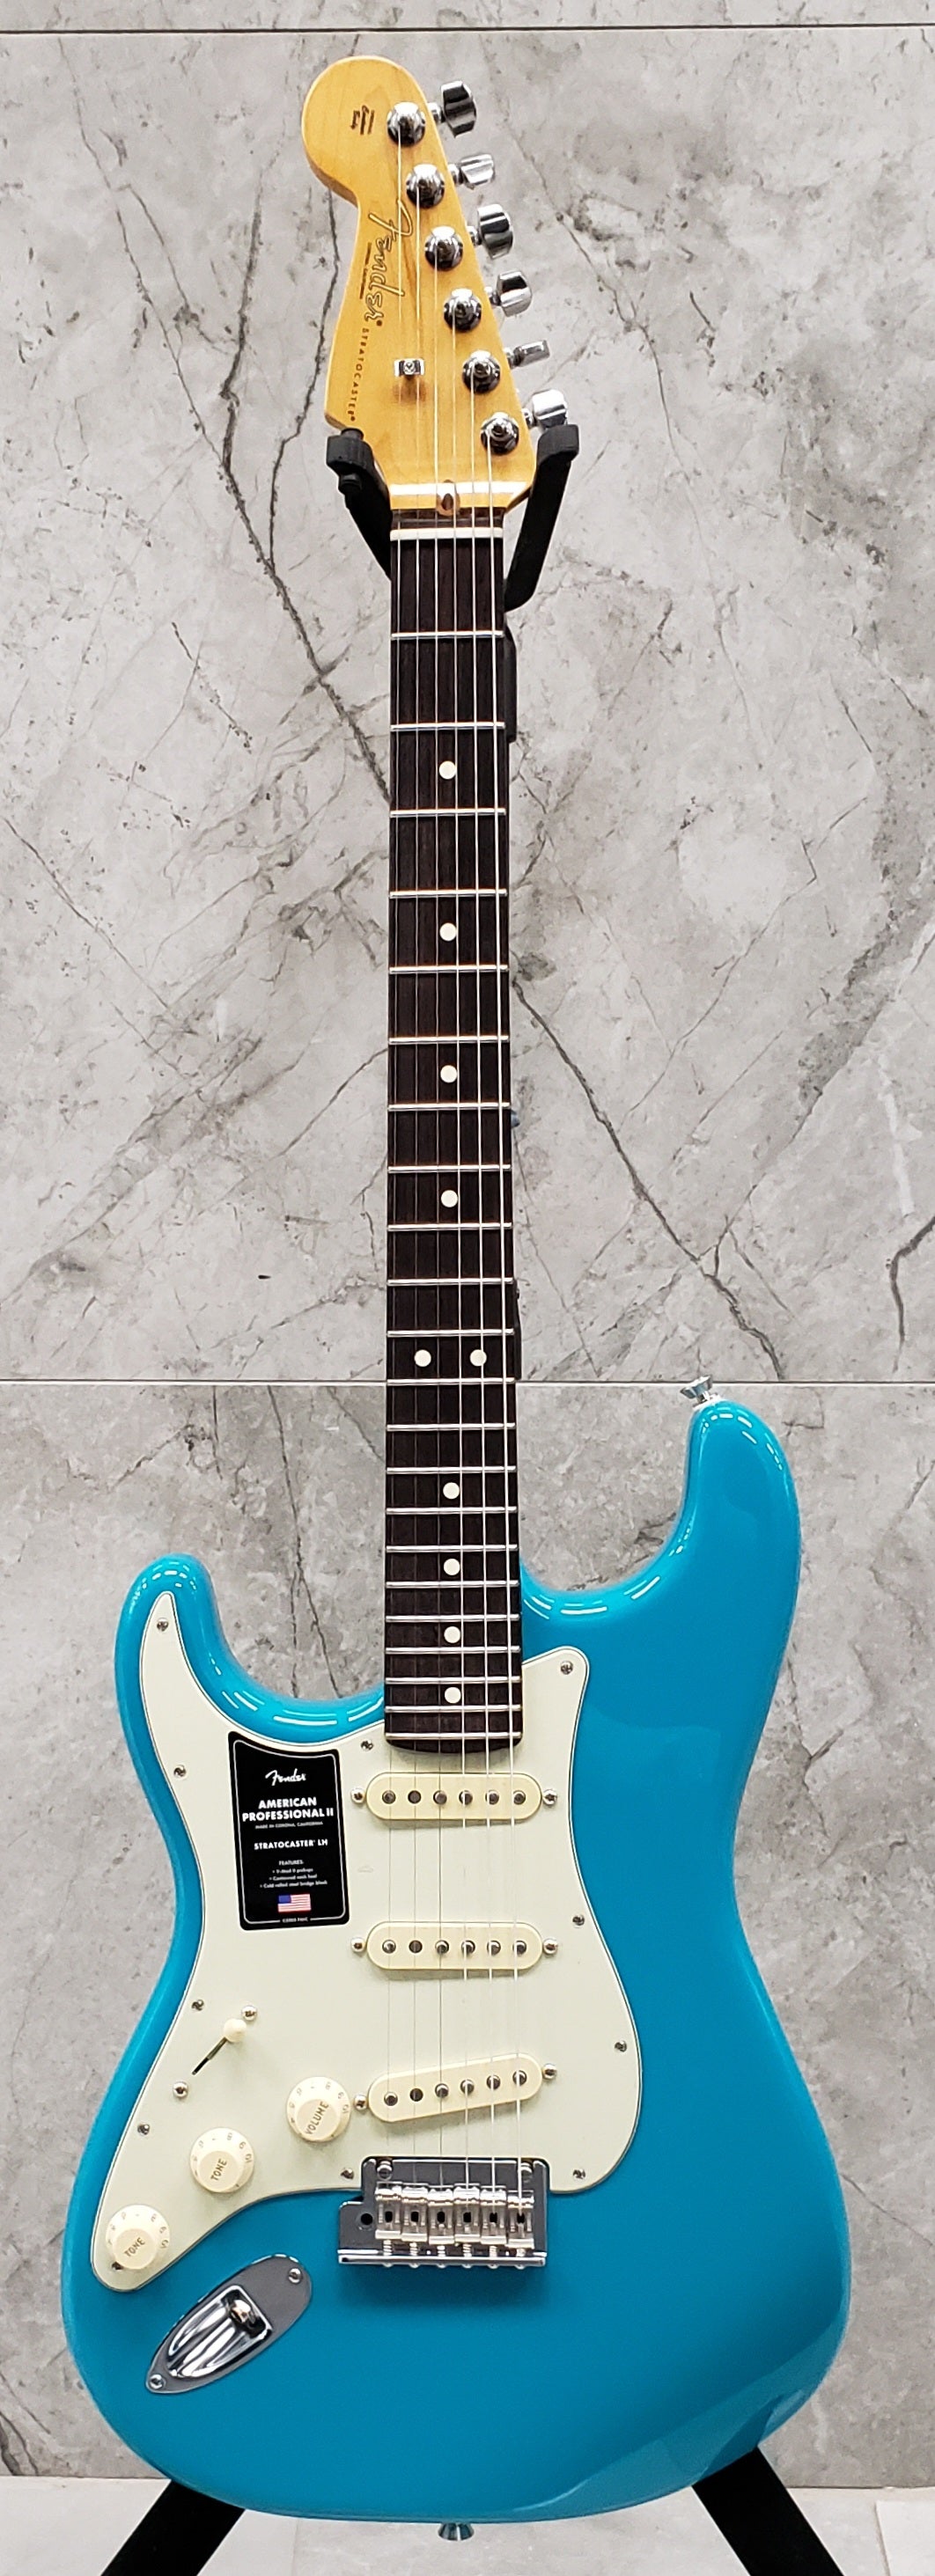 Fender American Professional II Stratocaster Left Hand Rosewood Fingerboard Miami Blue F-0113930719 SERIAL NUMBER US22000978 - 7.8 LBS